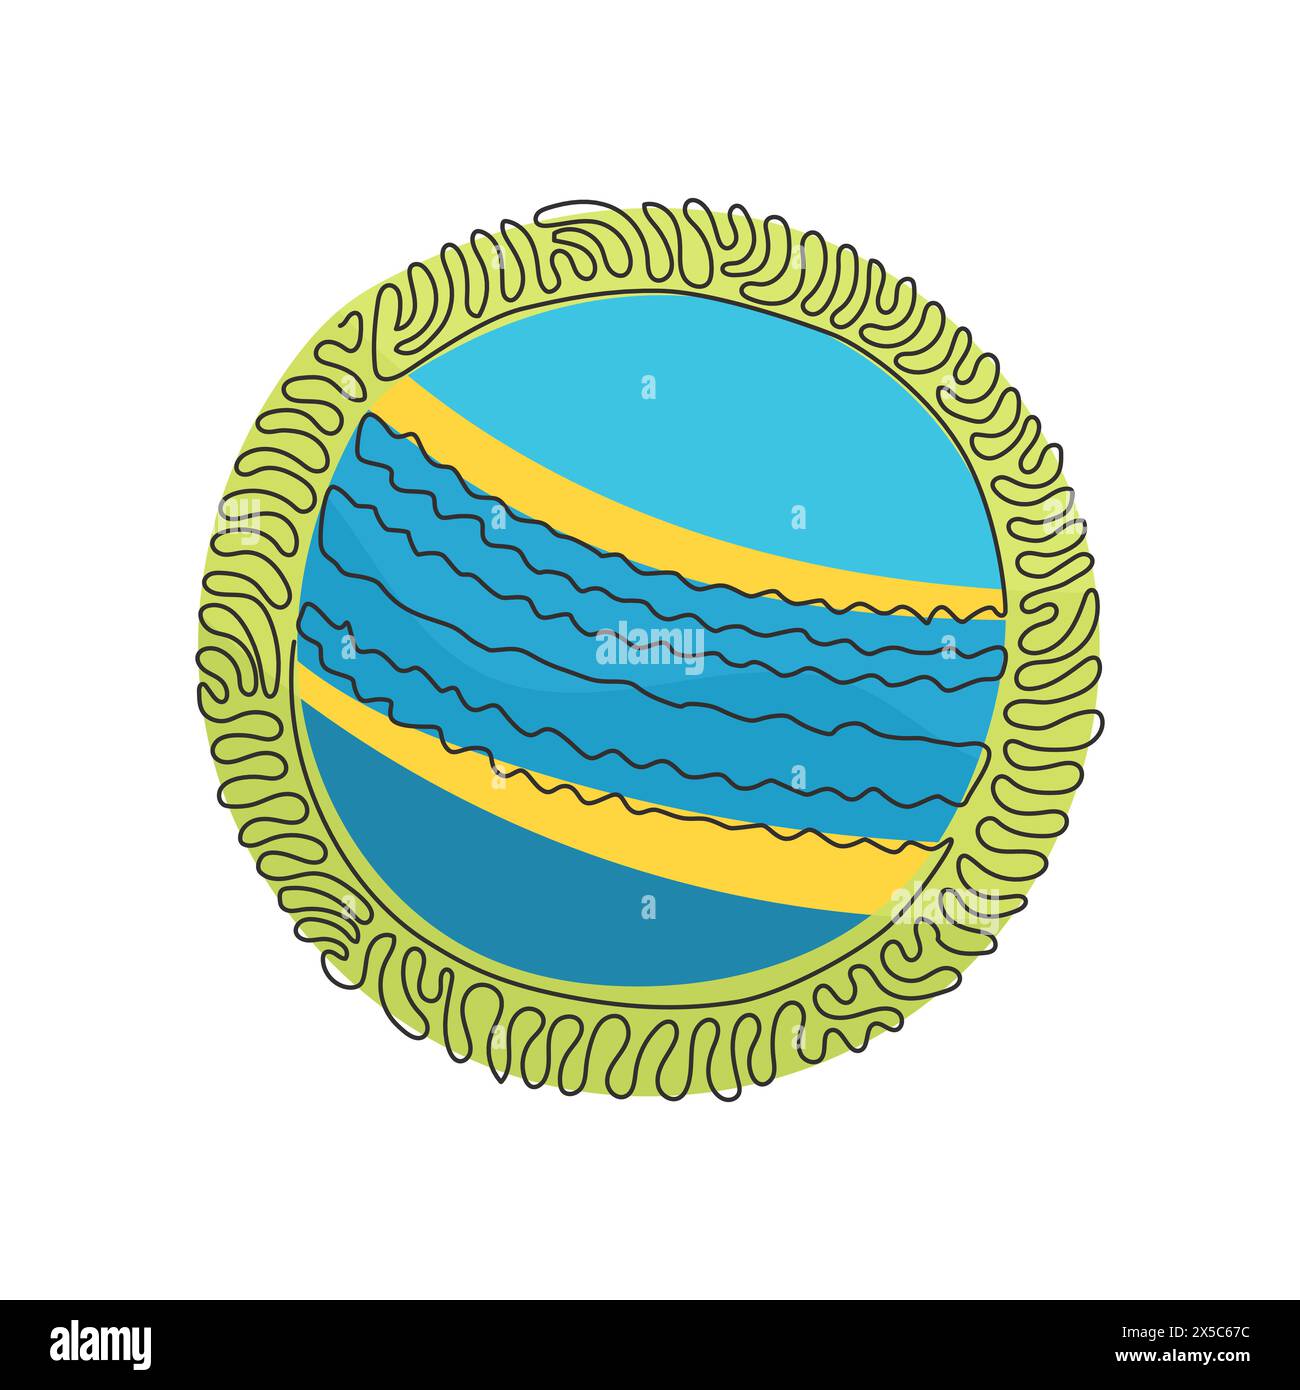 Single continuous line drawing cricket ball leather hard circle stitch close-up. Sports equipment. Summer team sports. Swirl curl circle background st Stock Vector